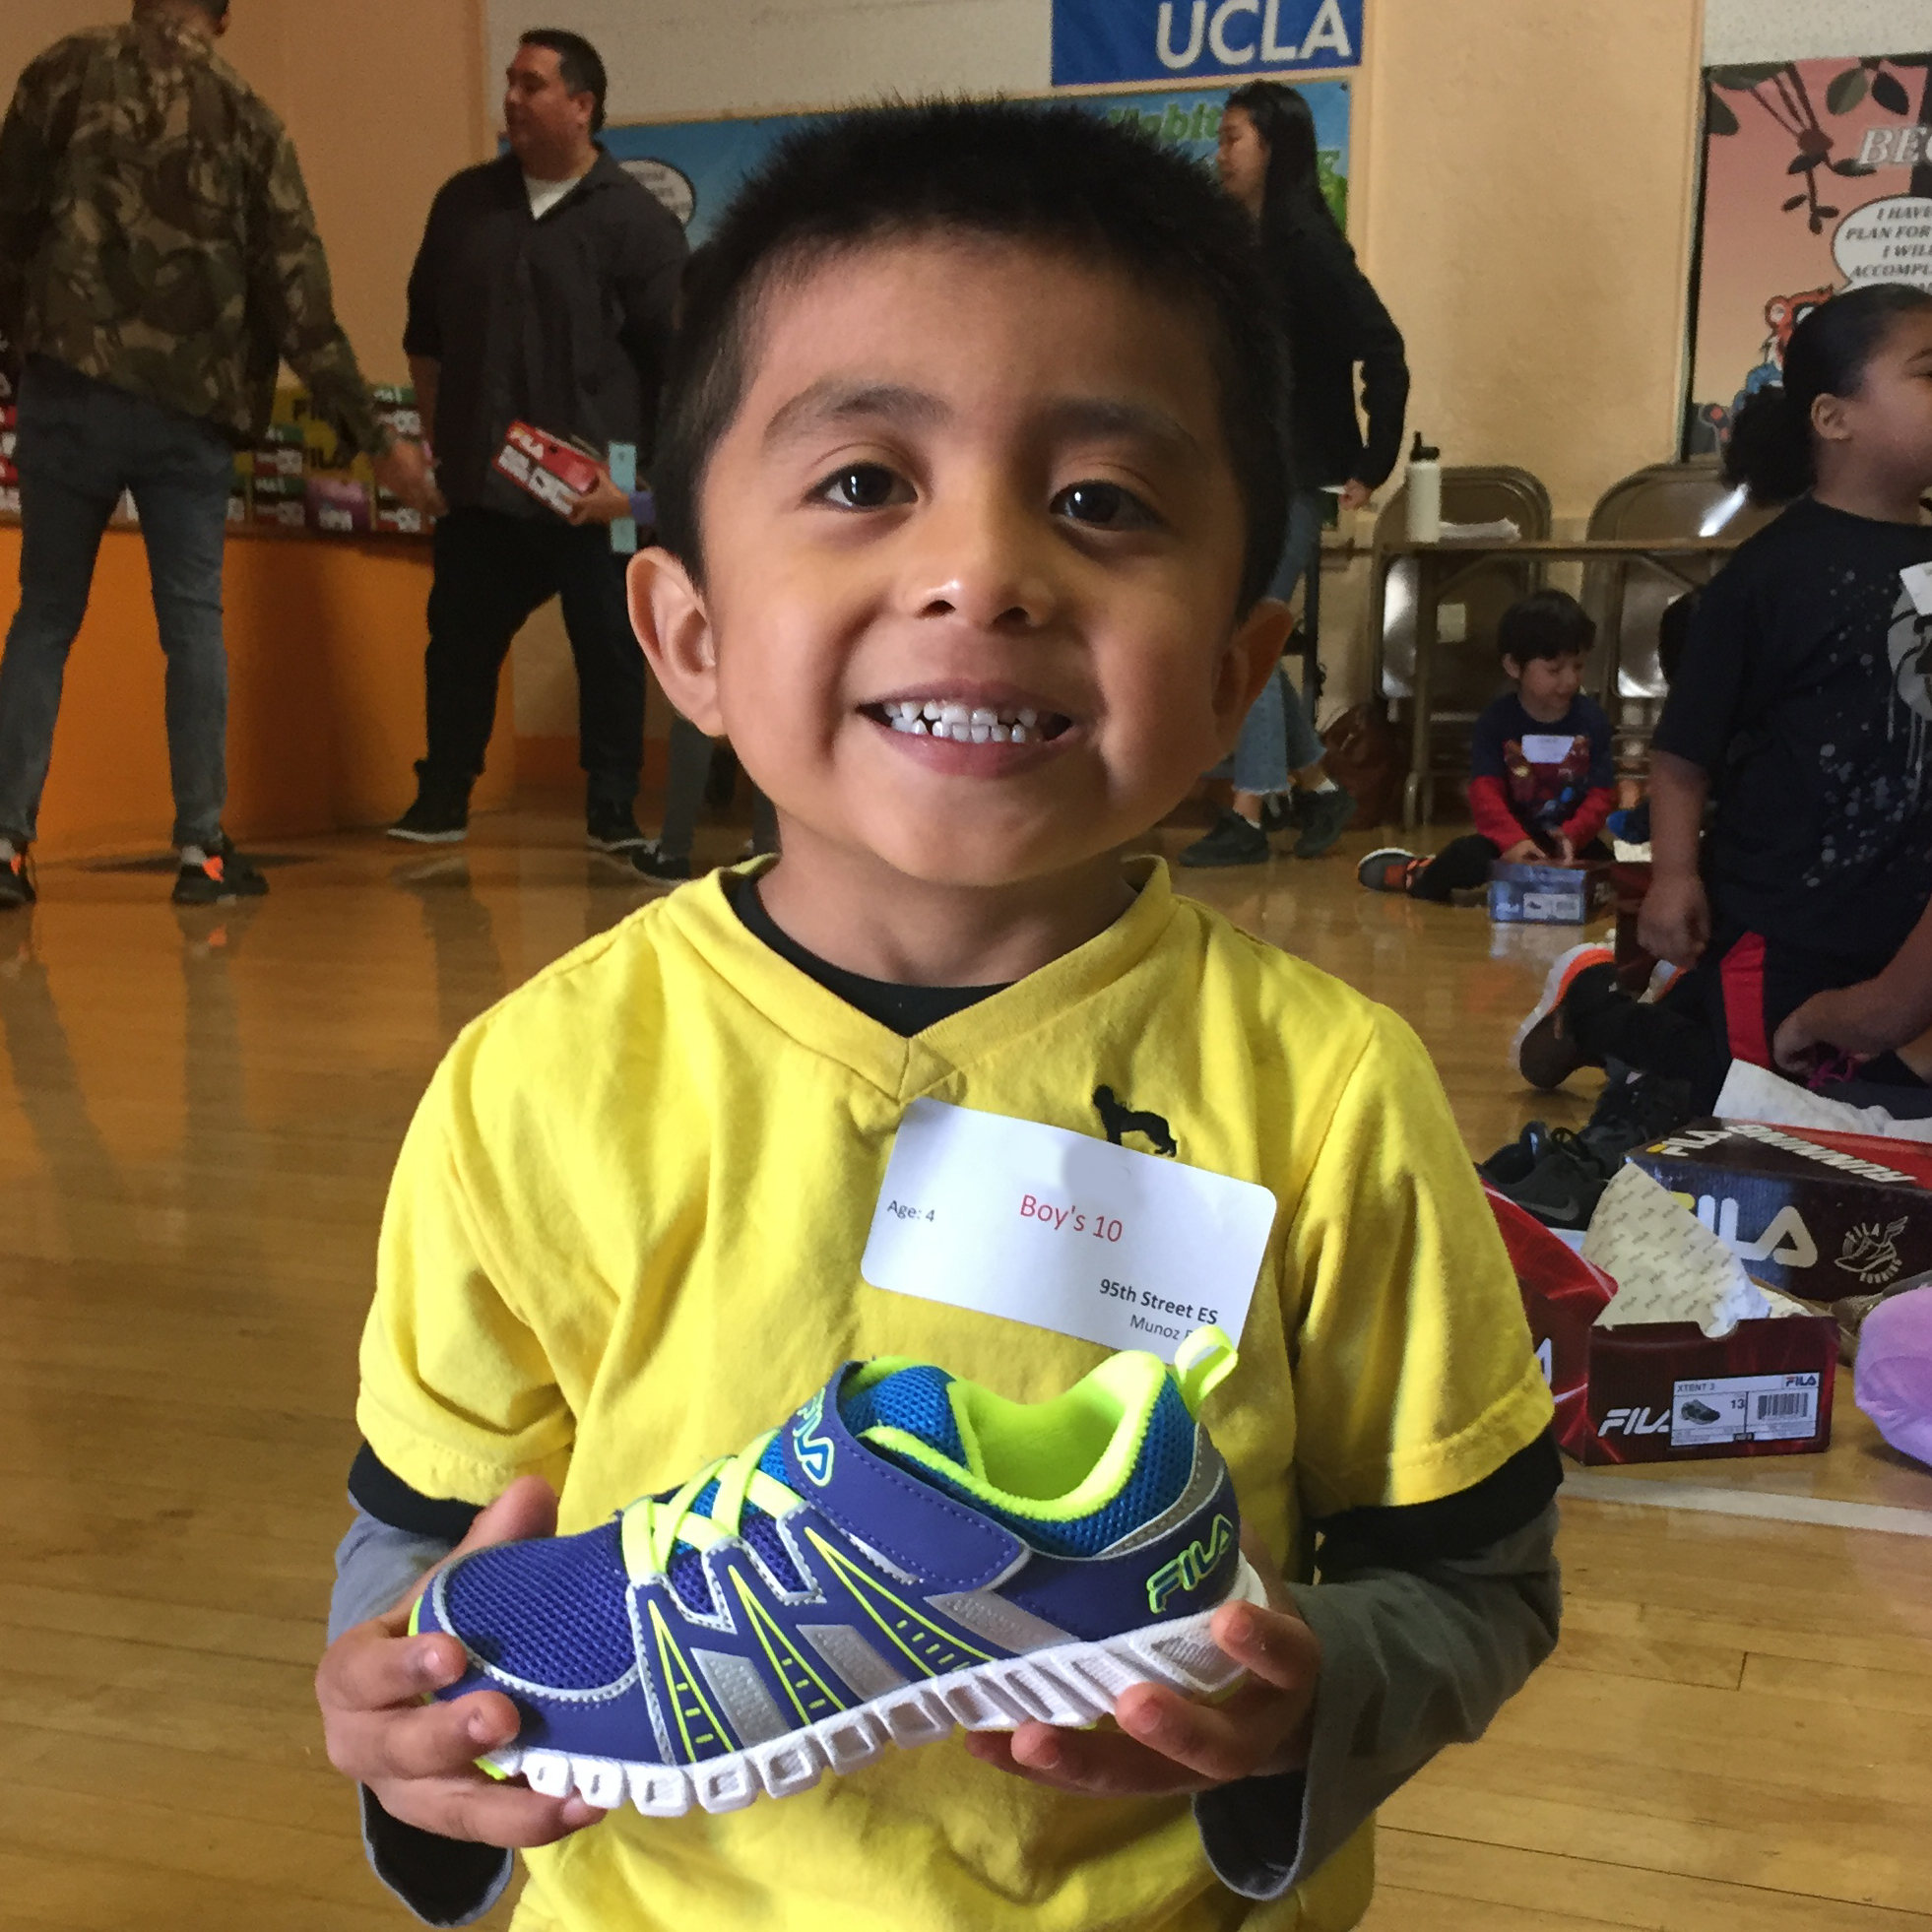 Dan and friends raise funds for shoes